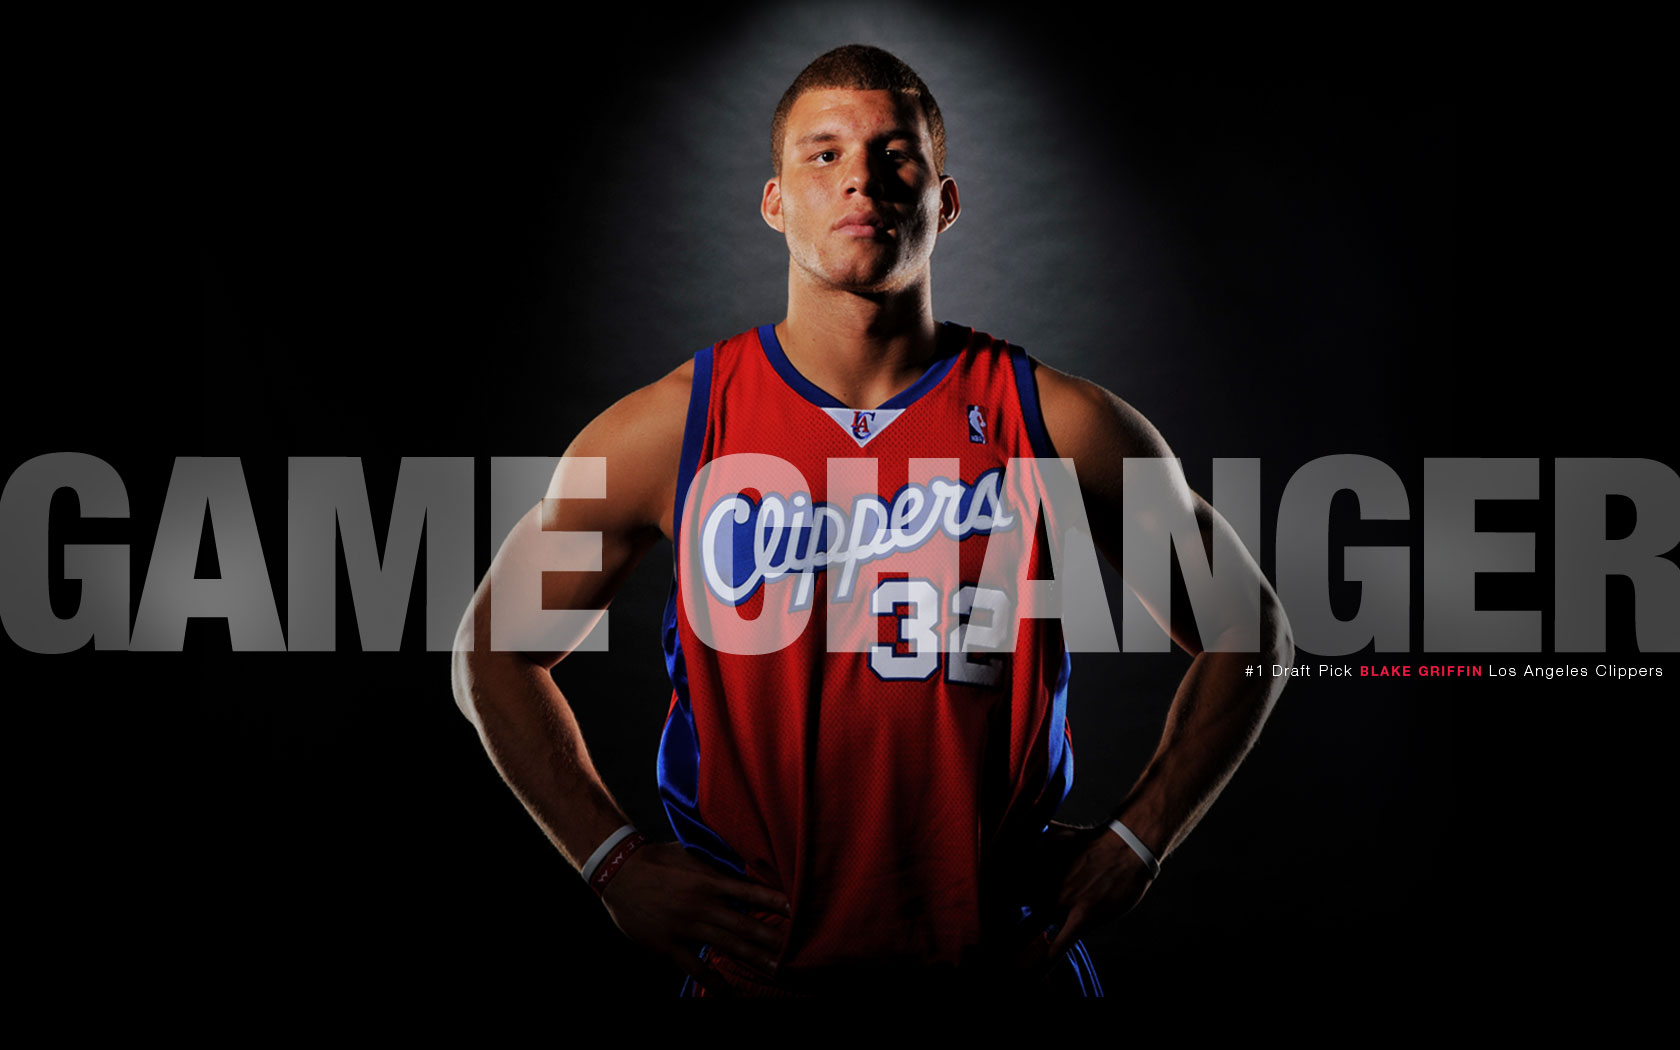 2009-10 Nba Season Los Angeles Clippers Wallpaper - Blake Griffin Clippers - HD Wallpaper 